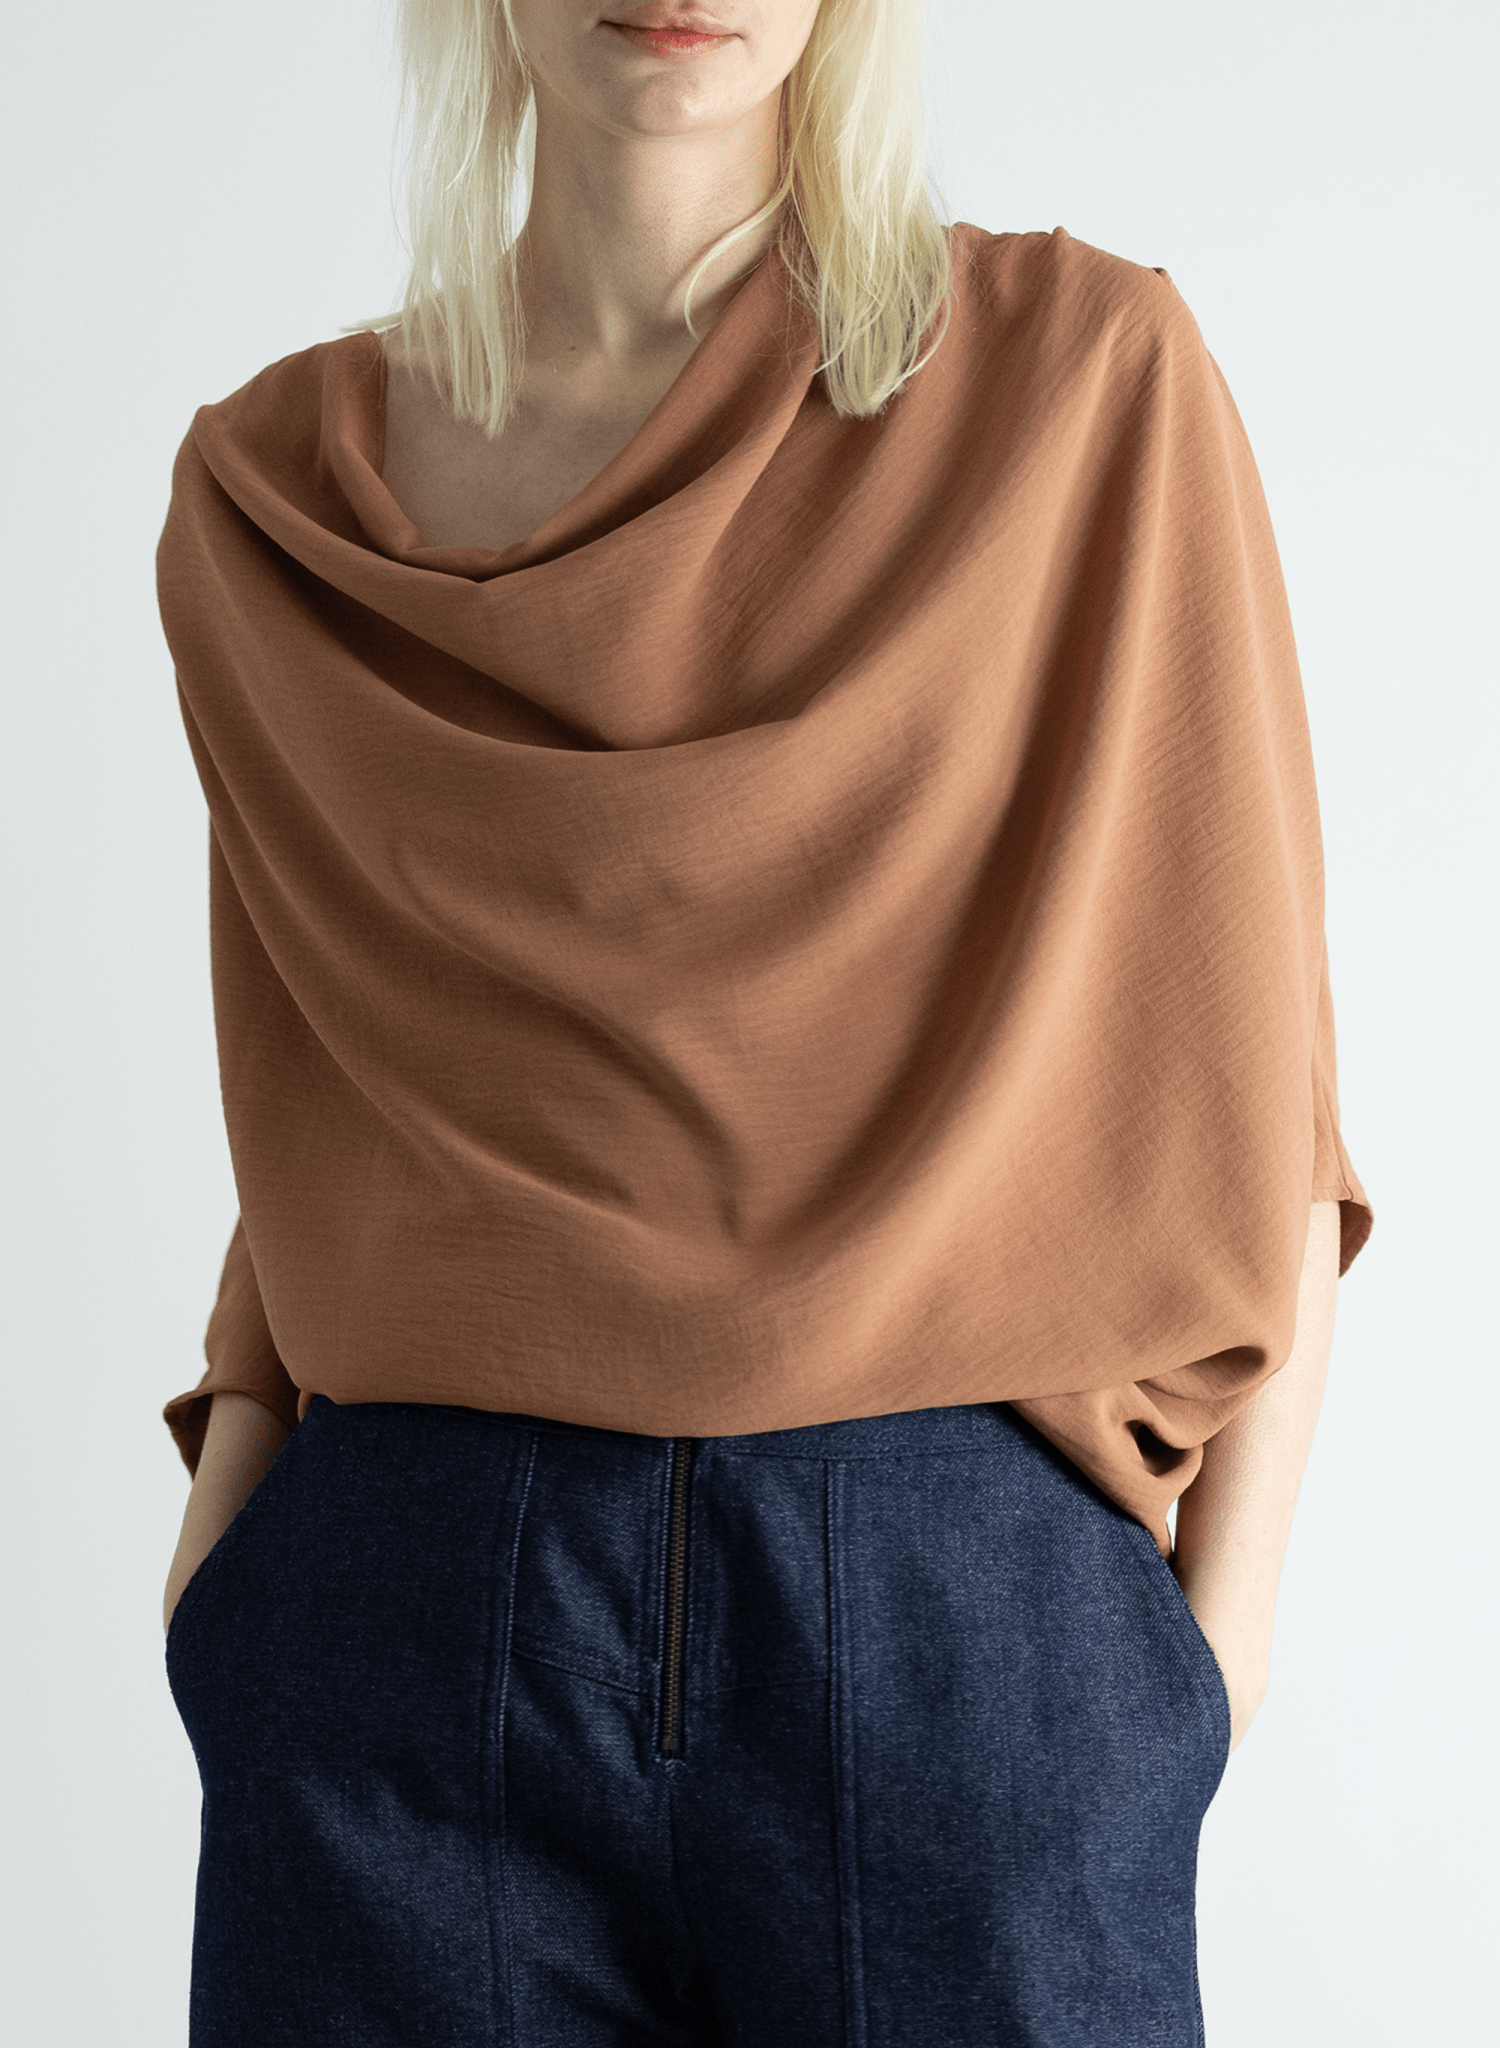 Abstraction Cowl Top - Lilac - Meg Canada